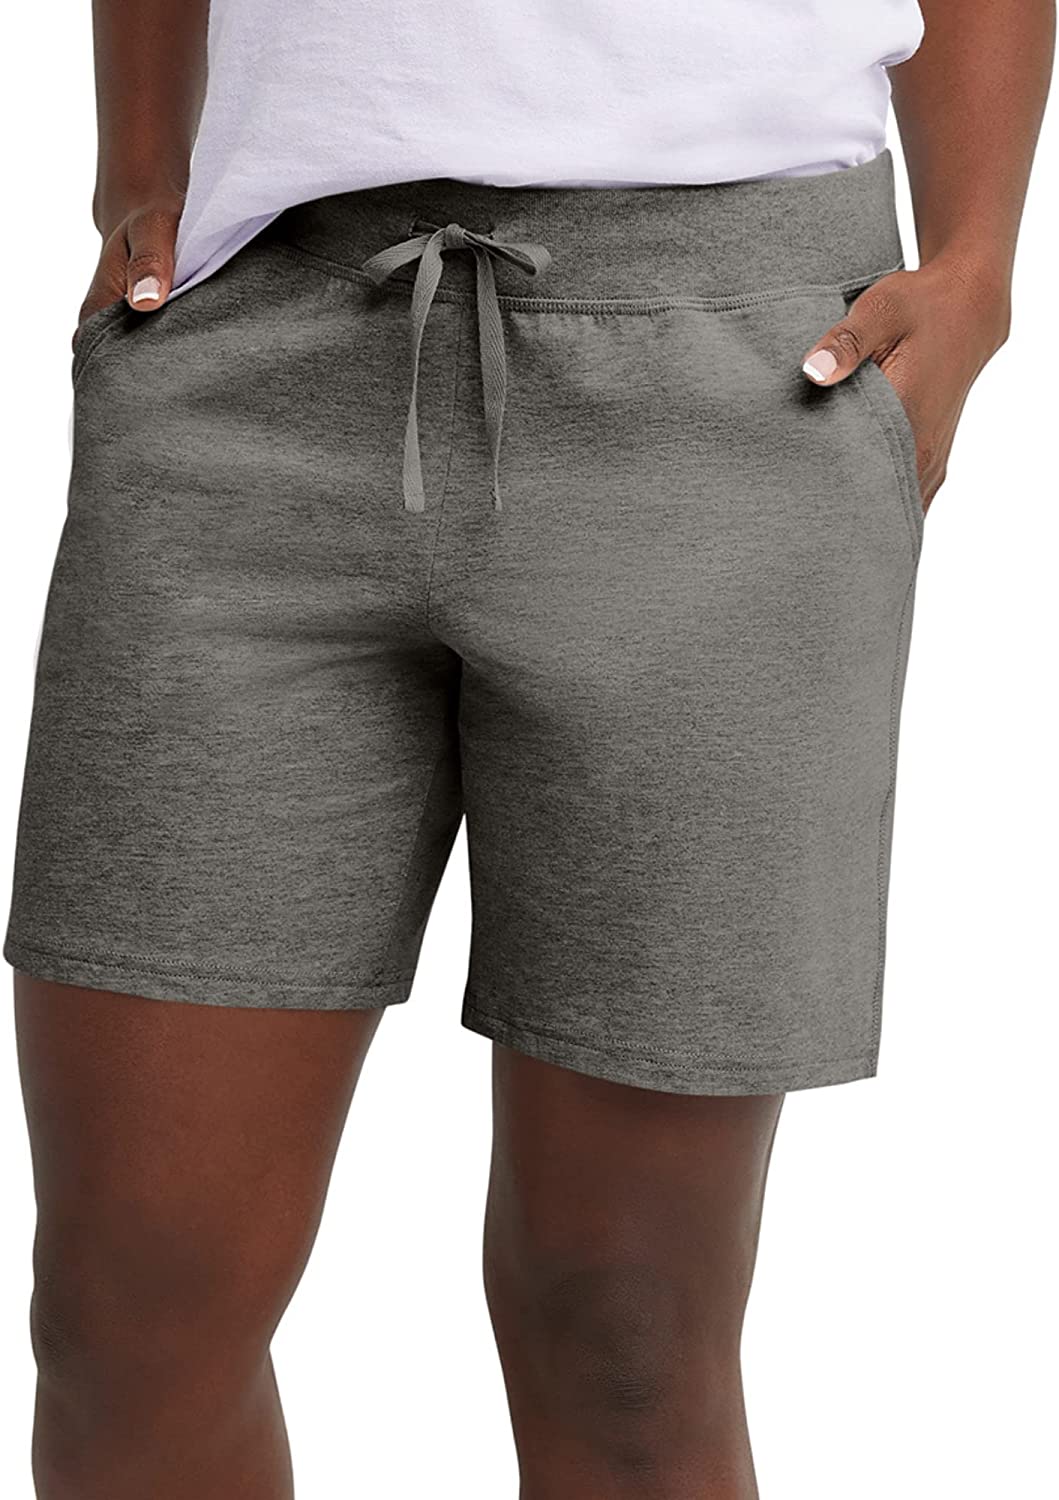 Just My Size Women's Plus Size Cotton Jersey Shorts, Pull-on Gym